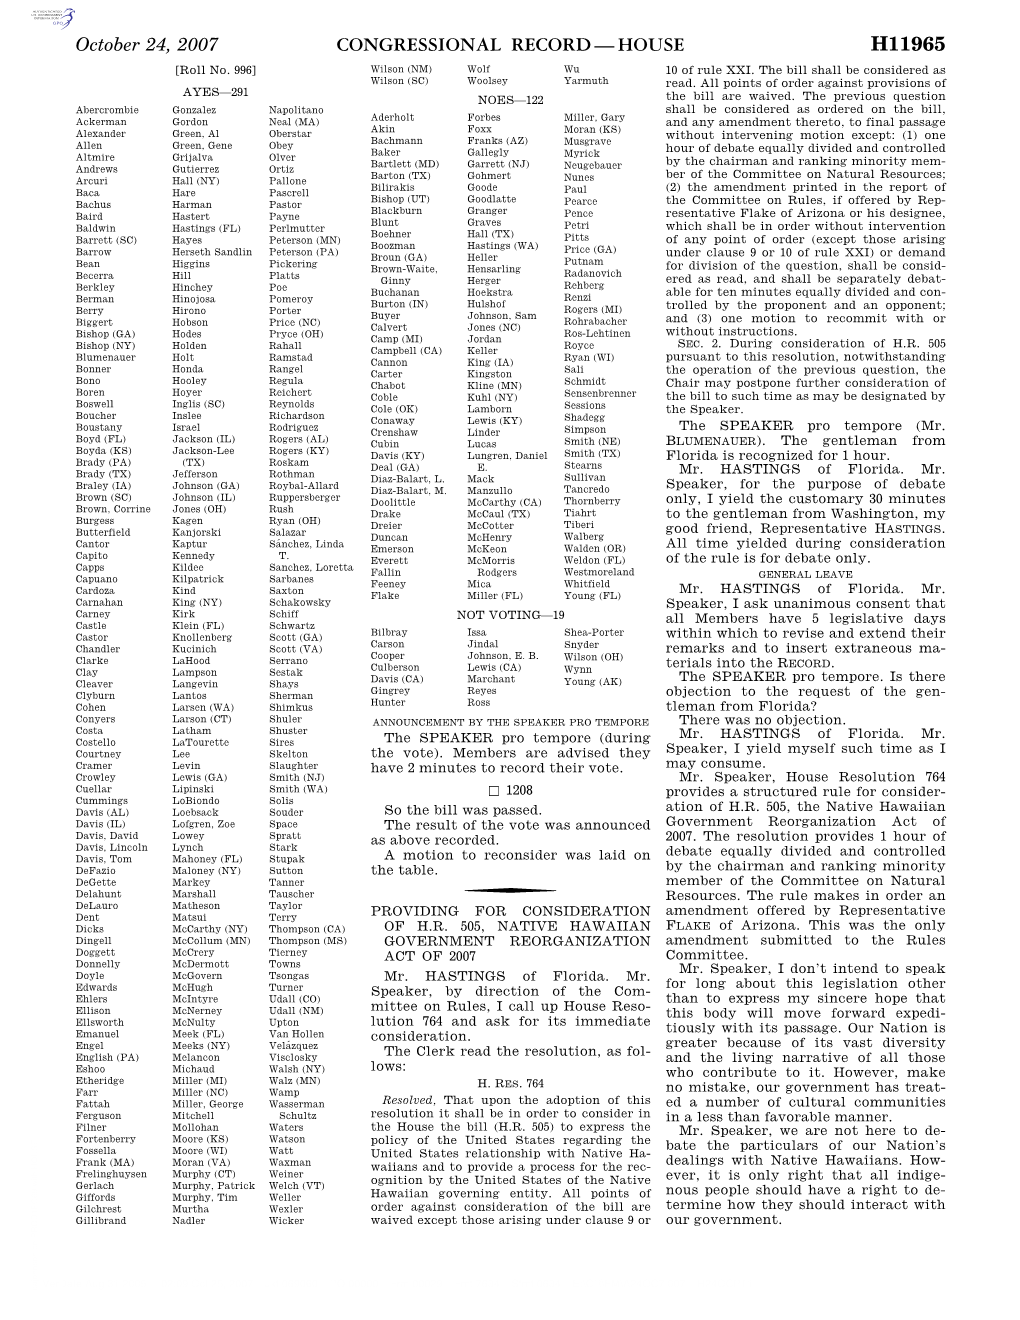 Congressional Record—House H11965